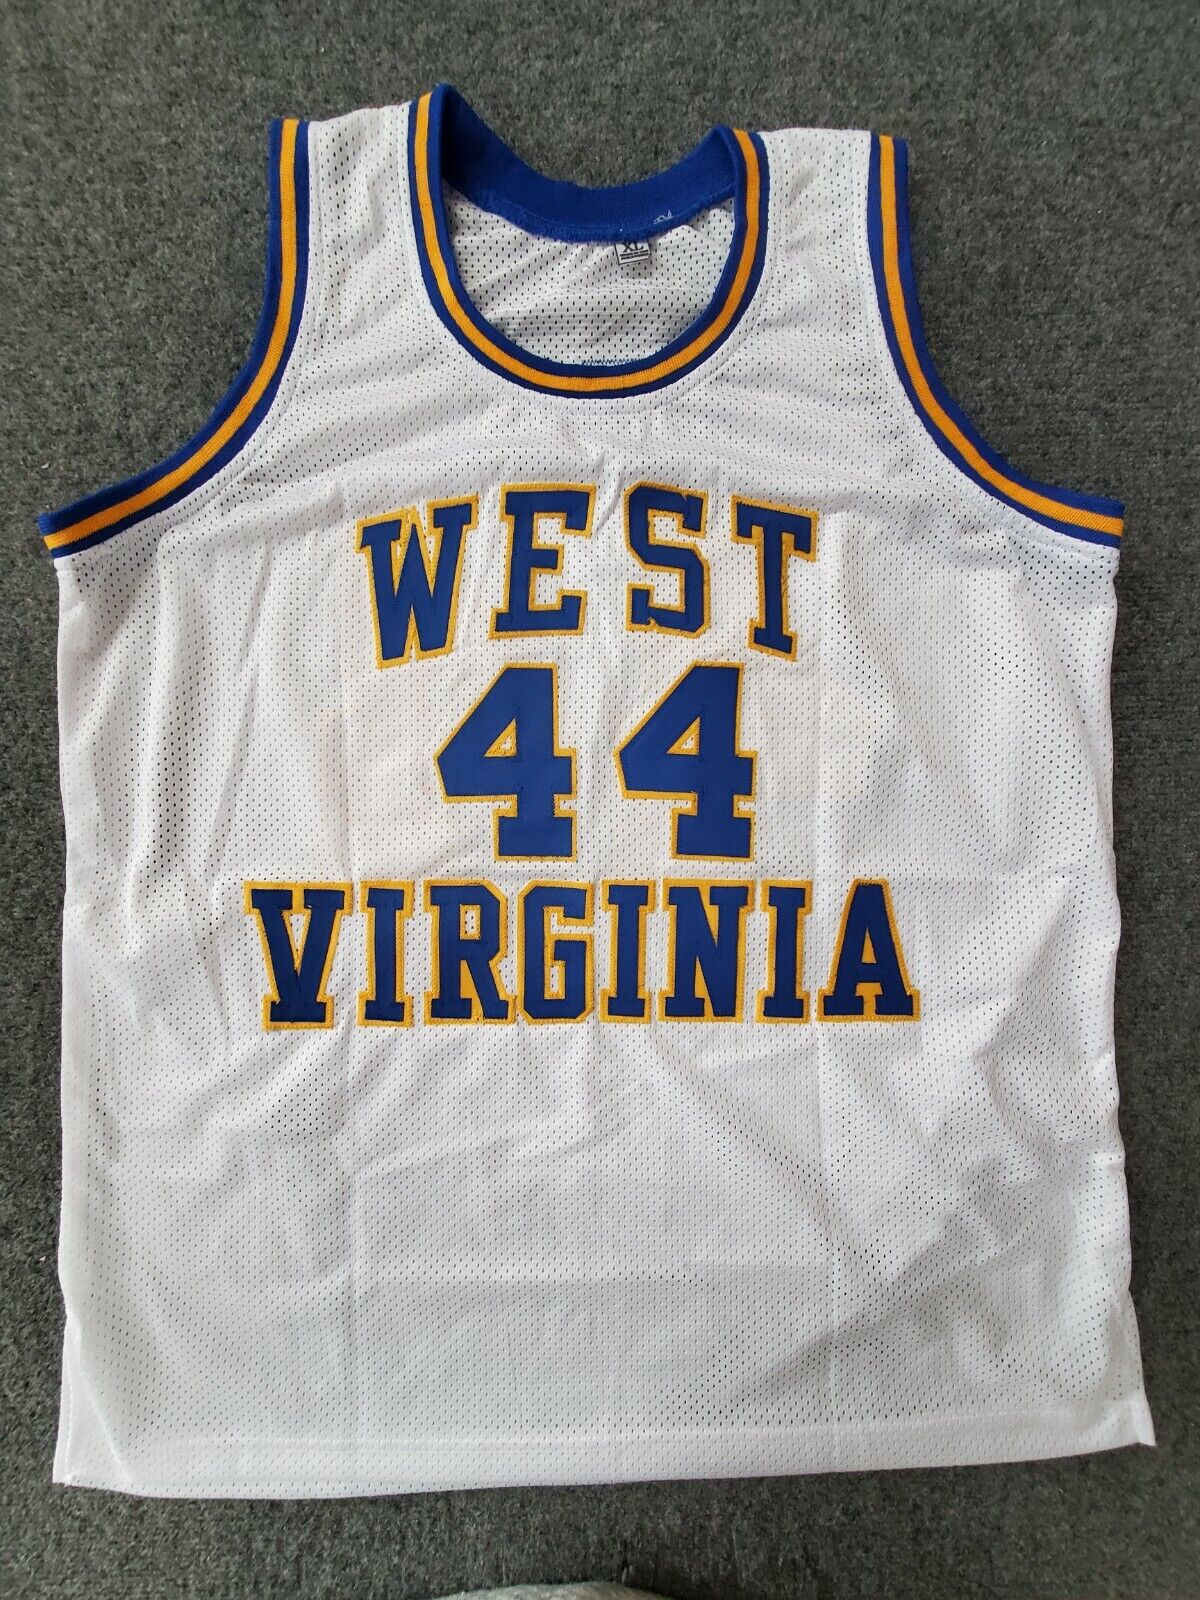 MVP Authentics West Virginia Mountaineers Jerry West Autographed Signed Jersey Psa Coa 224.10 sports jersey framing , jersey framing